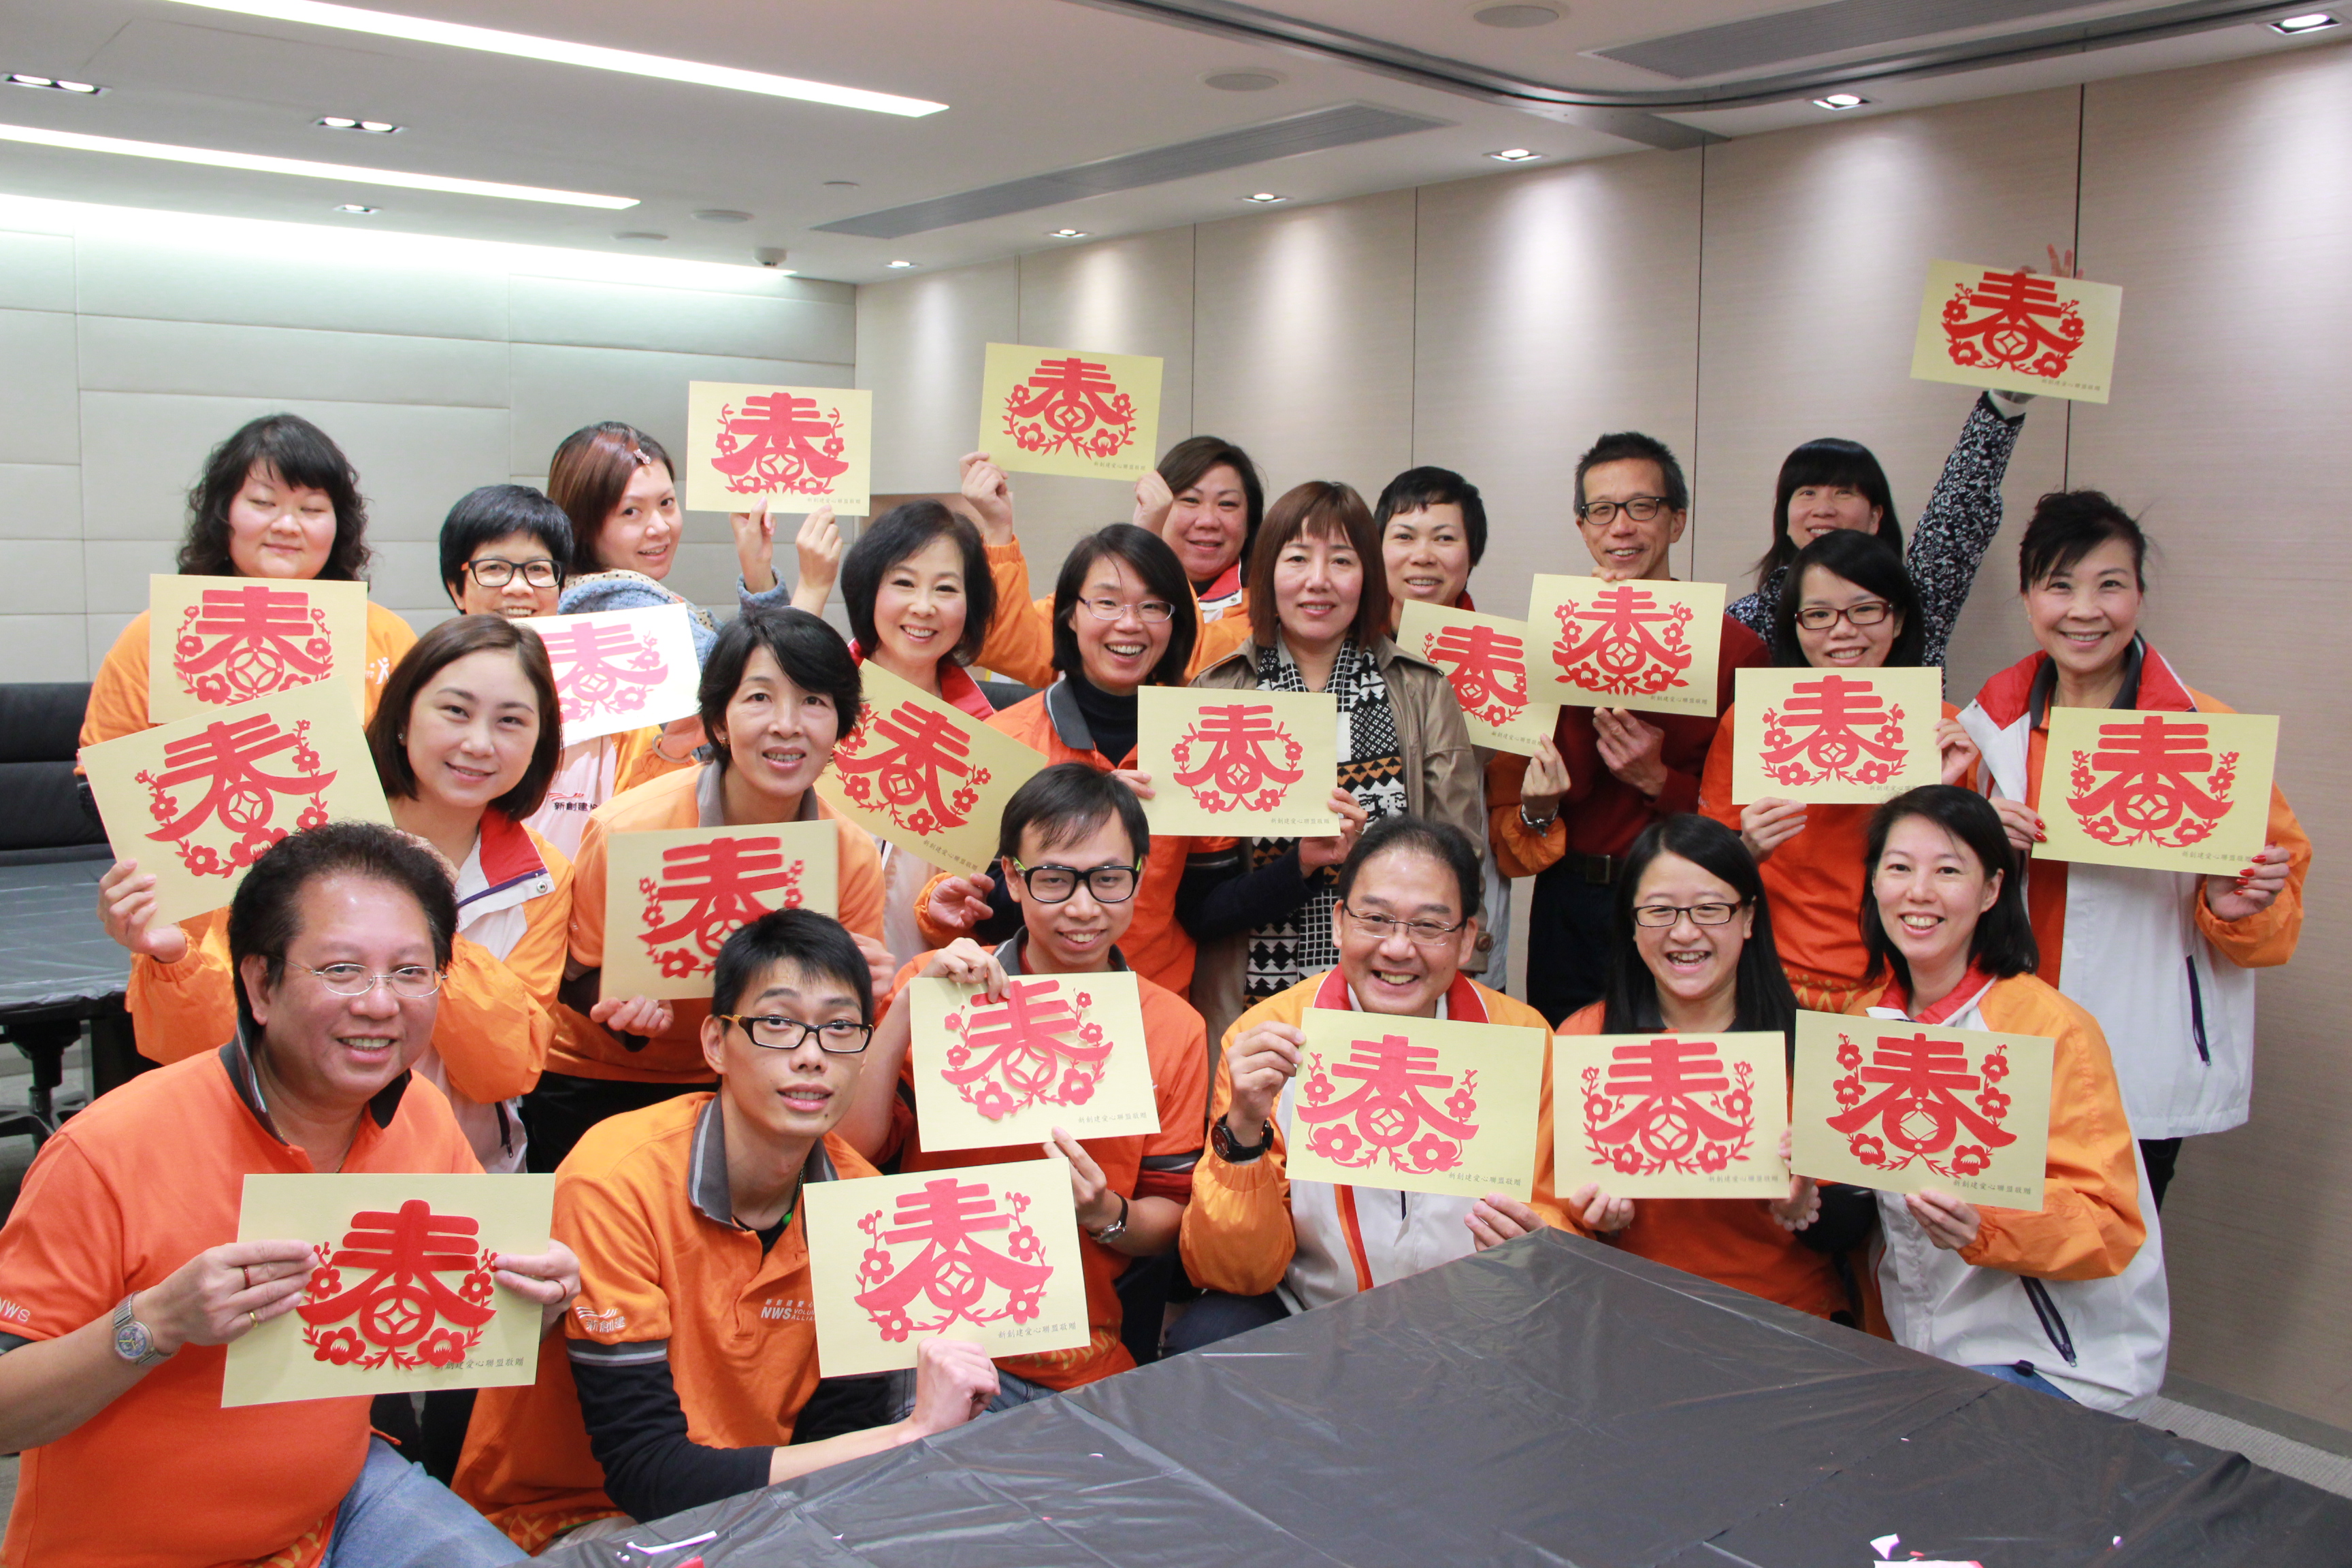 NWS Holdings corporate volunteer team wins Hong Kong Outstanding Corporate Citizenship Gold Award three years in running